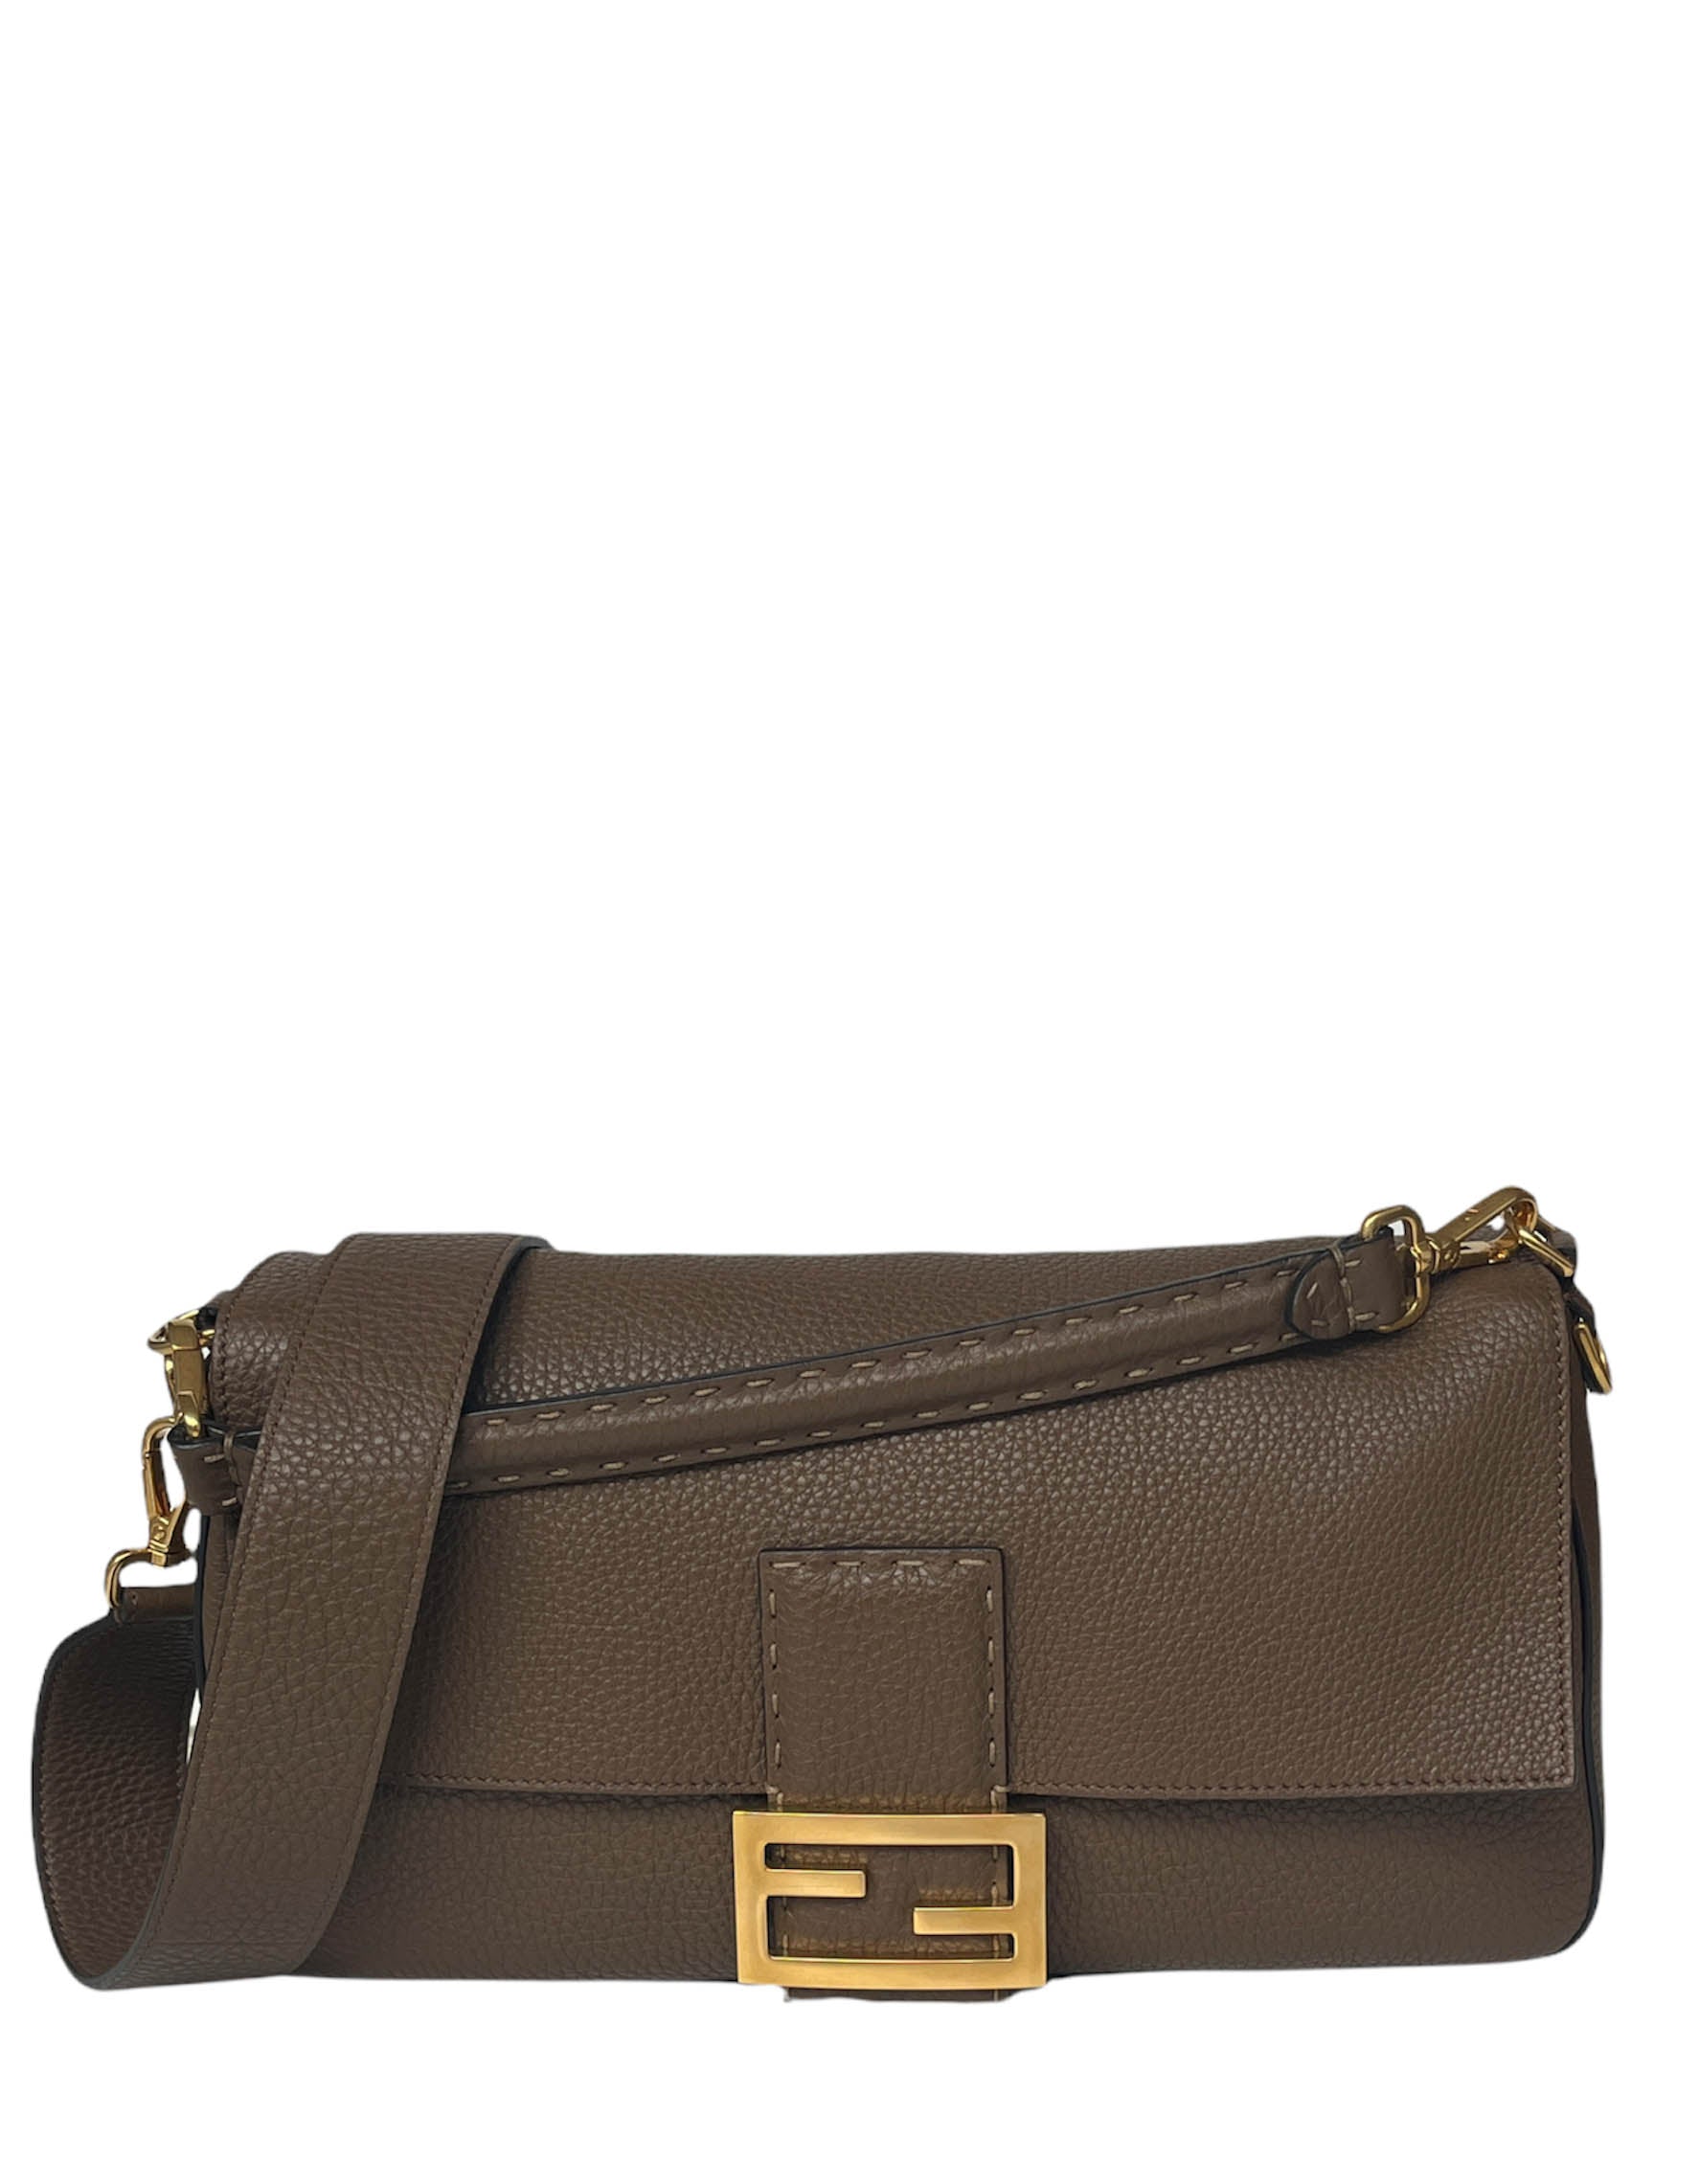 Fendi Brown Selleria Leather Large Baguette NM Bag w/ Two Straps